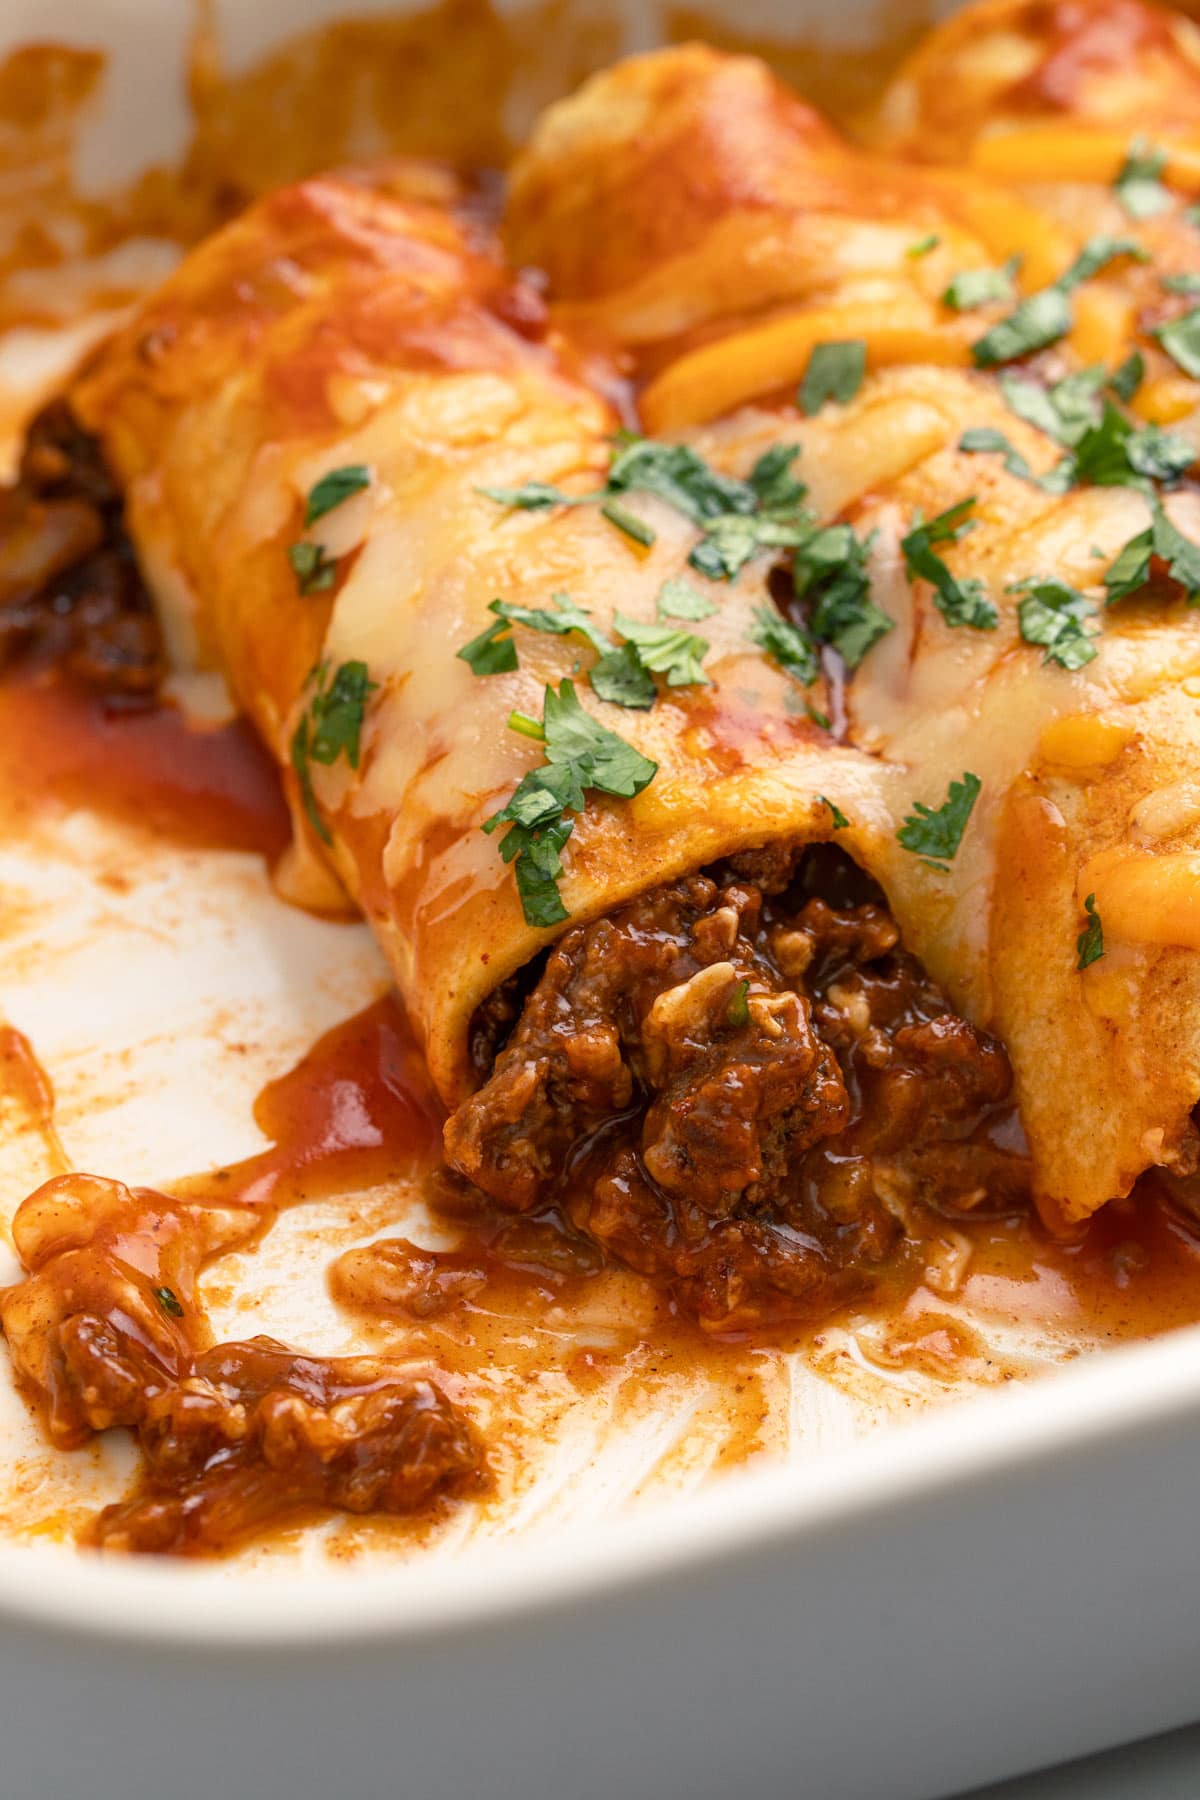 A close up shot of a beef enchilada with its filling spilling out.